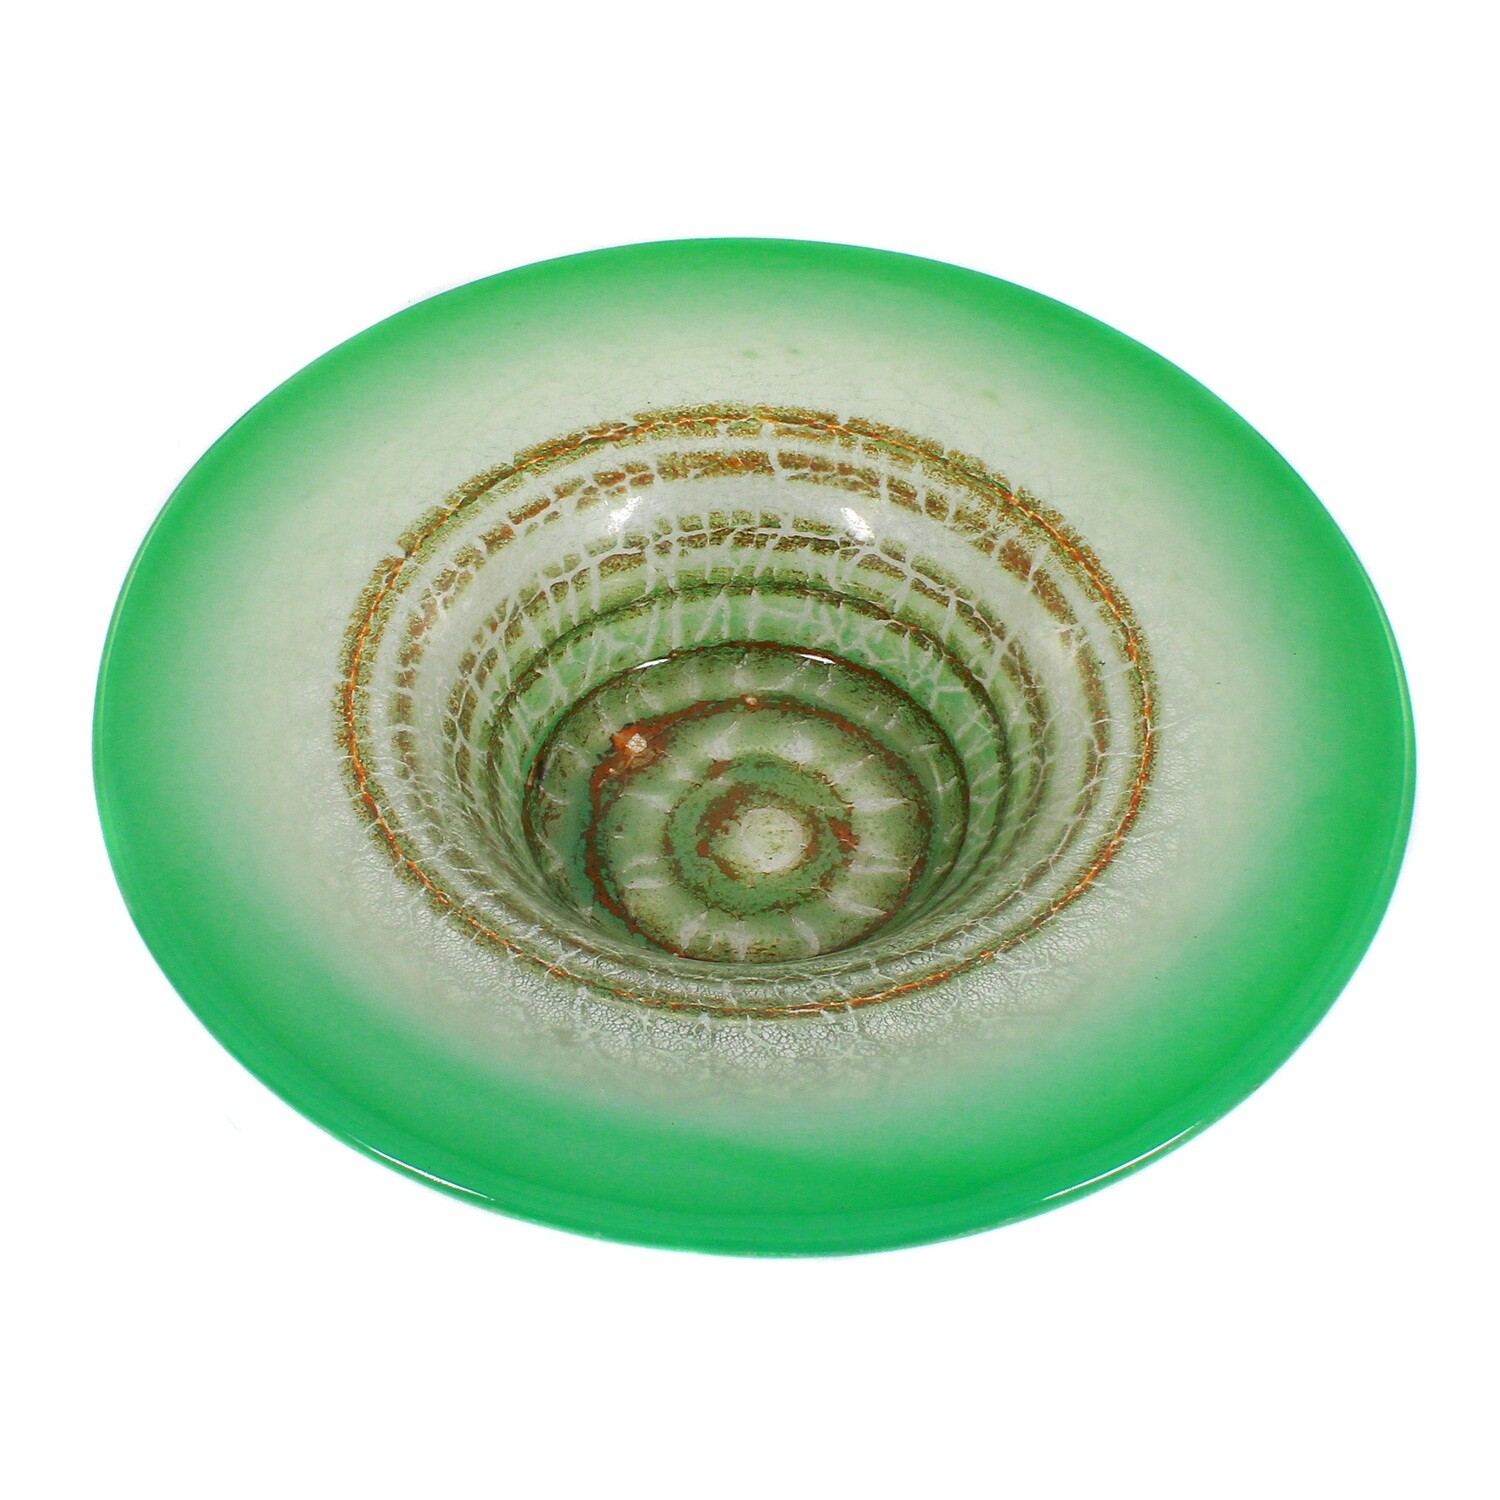 36 cm WMF Ikora bowl with green rim and yellow & white powder inclusions